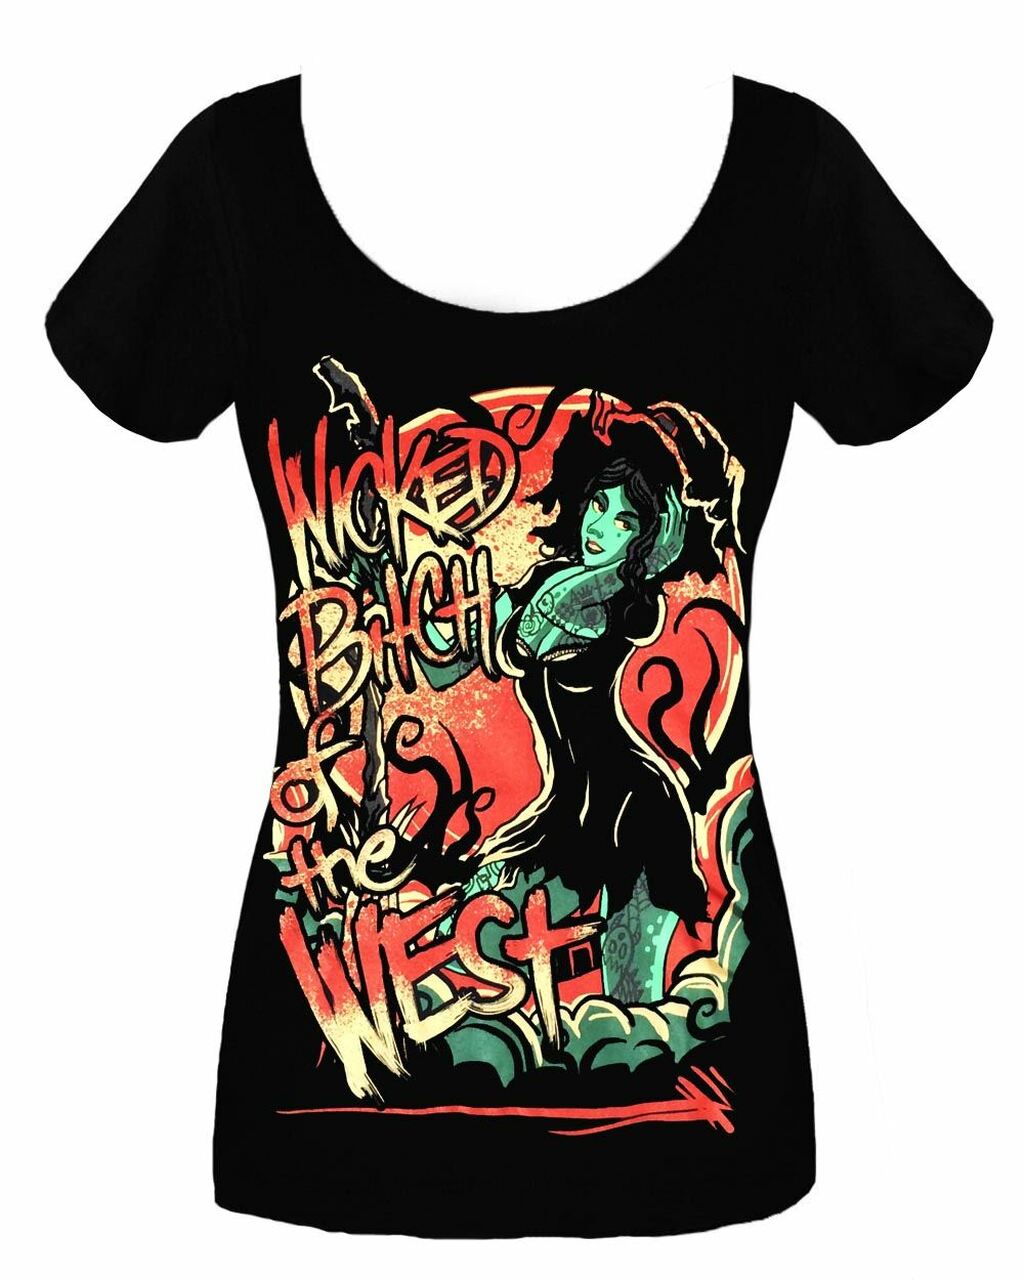 Twisted Apparel Wicked Bitch Of The West coop Neck T-Shirt | Black